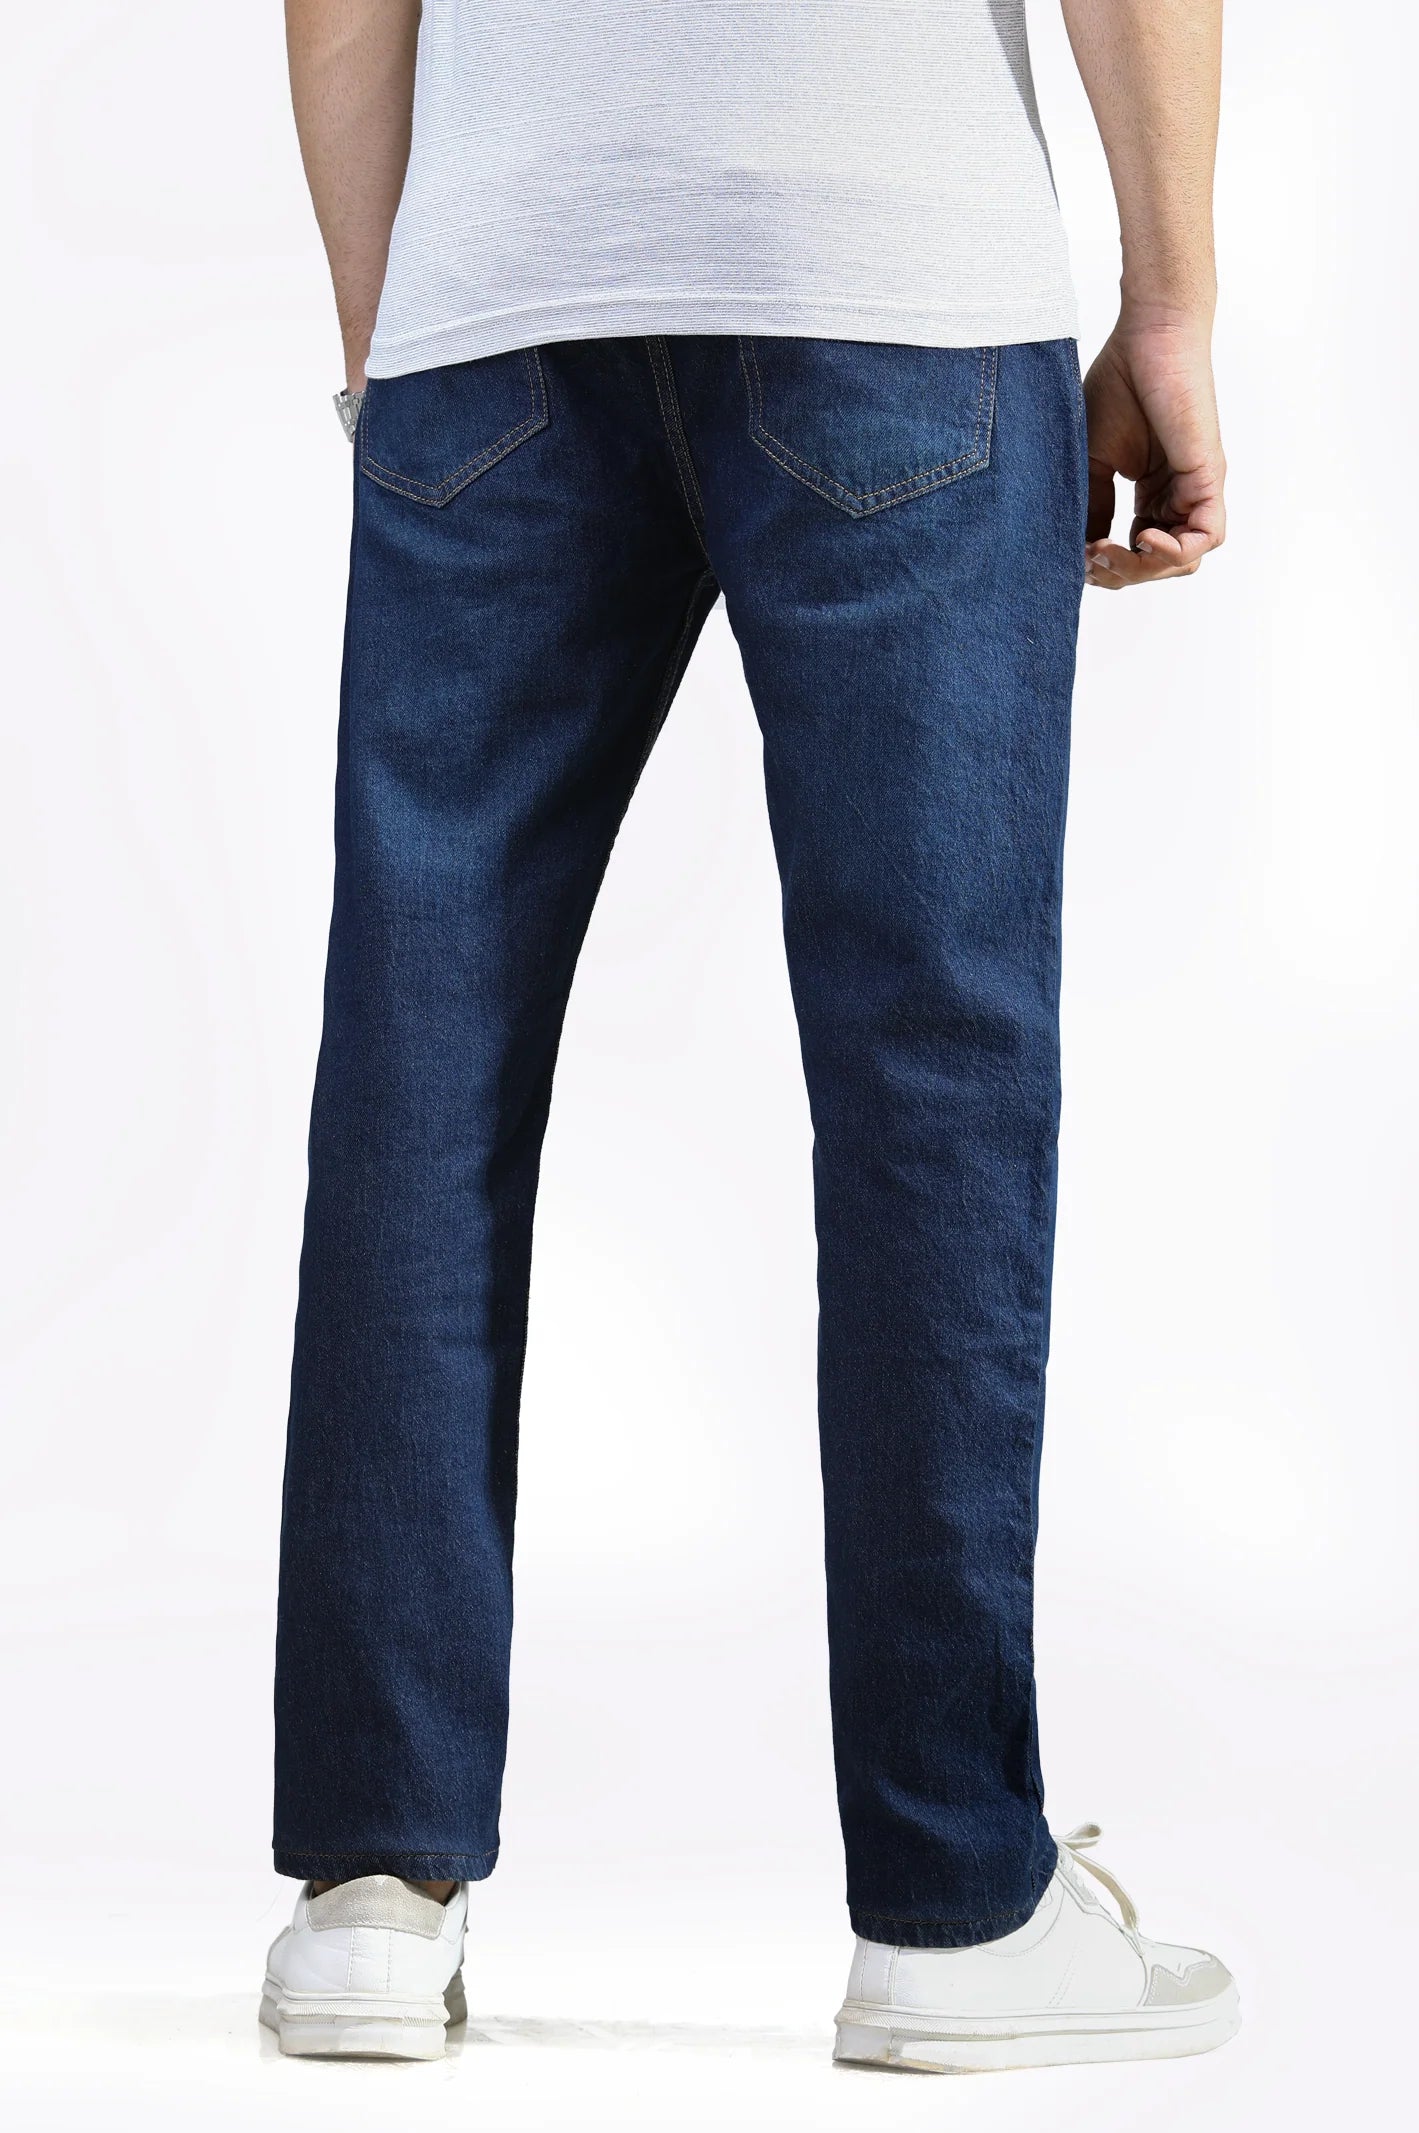 Blue Smart Fit Jeans From Diners